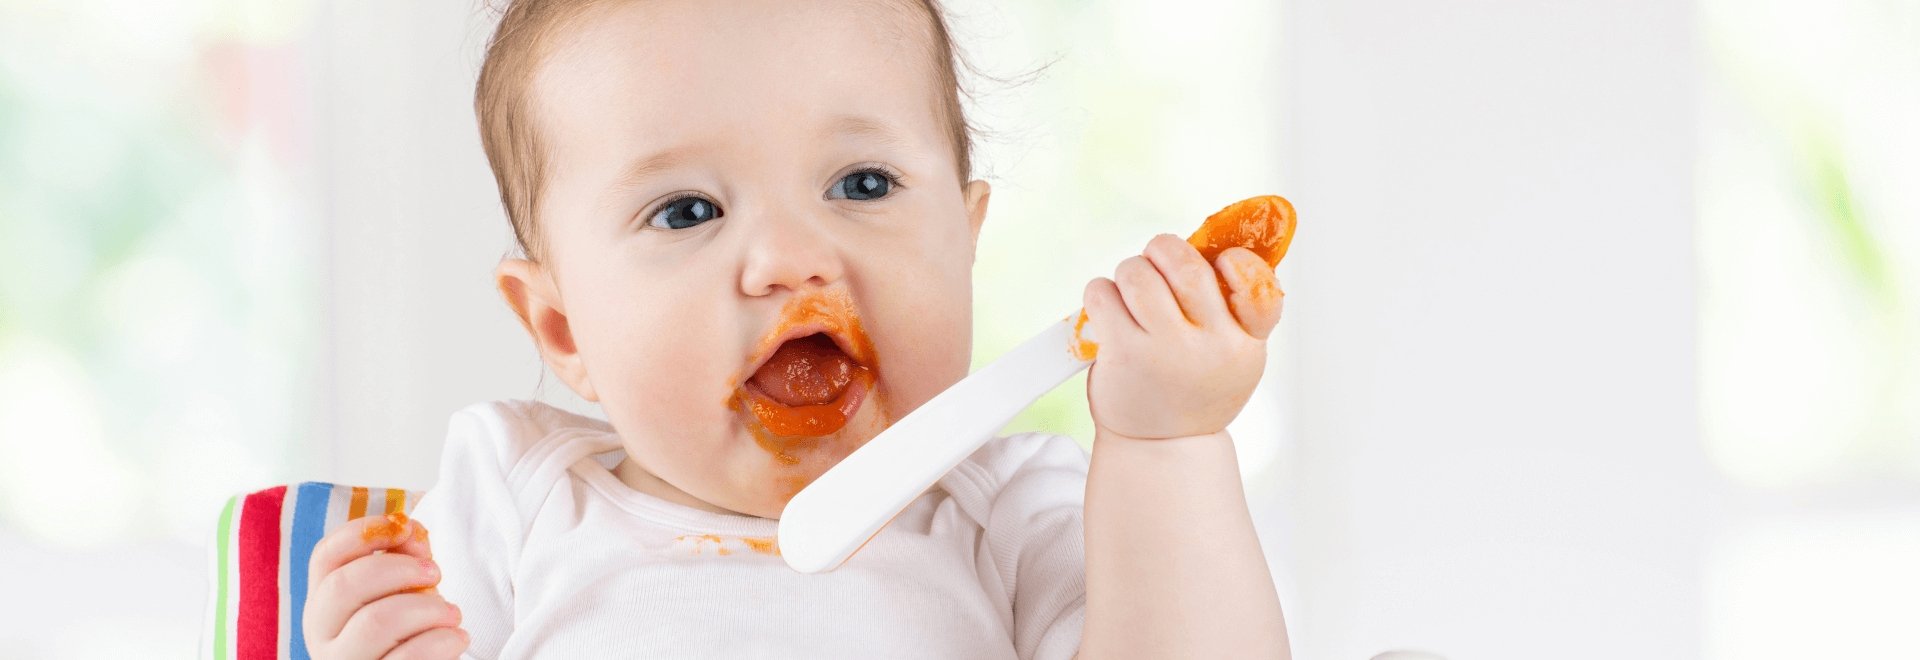 Detecting the Signs Your Infant Is Ready for Solid Foods